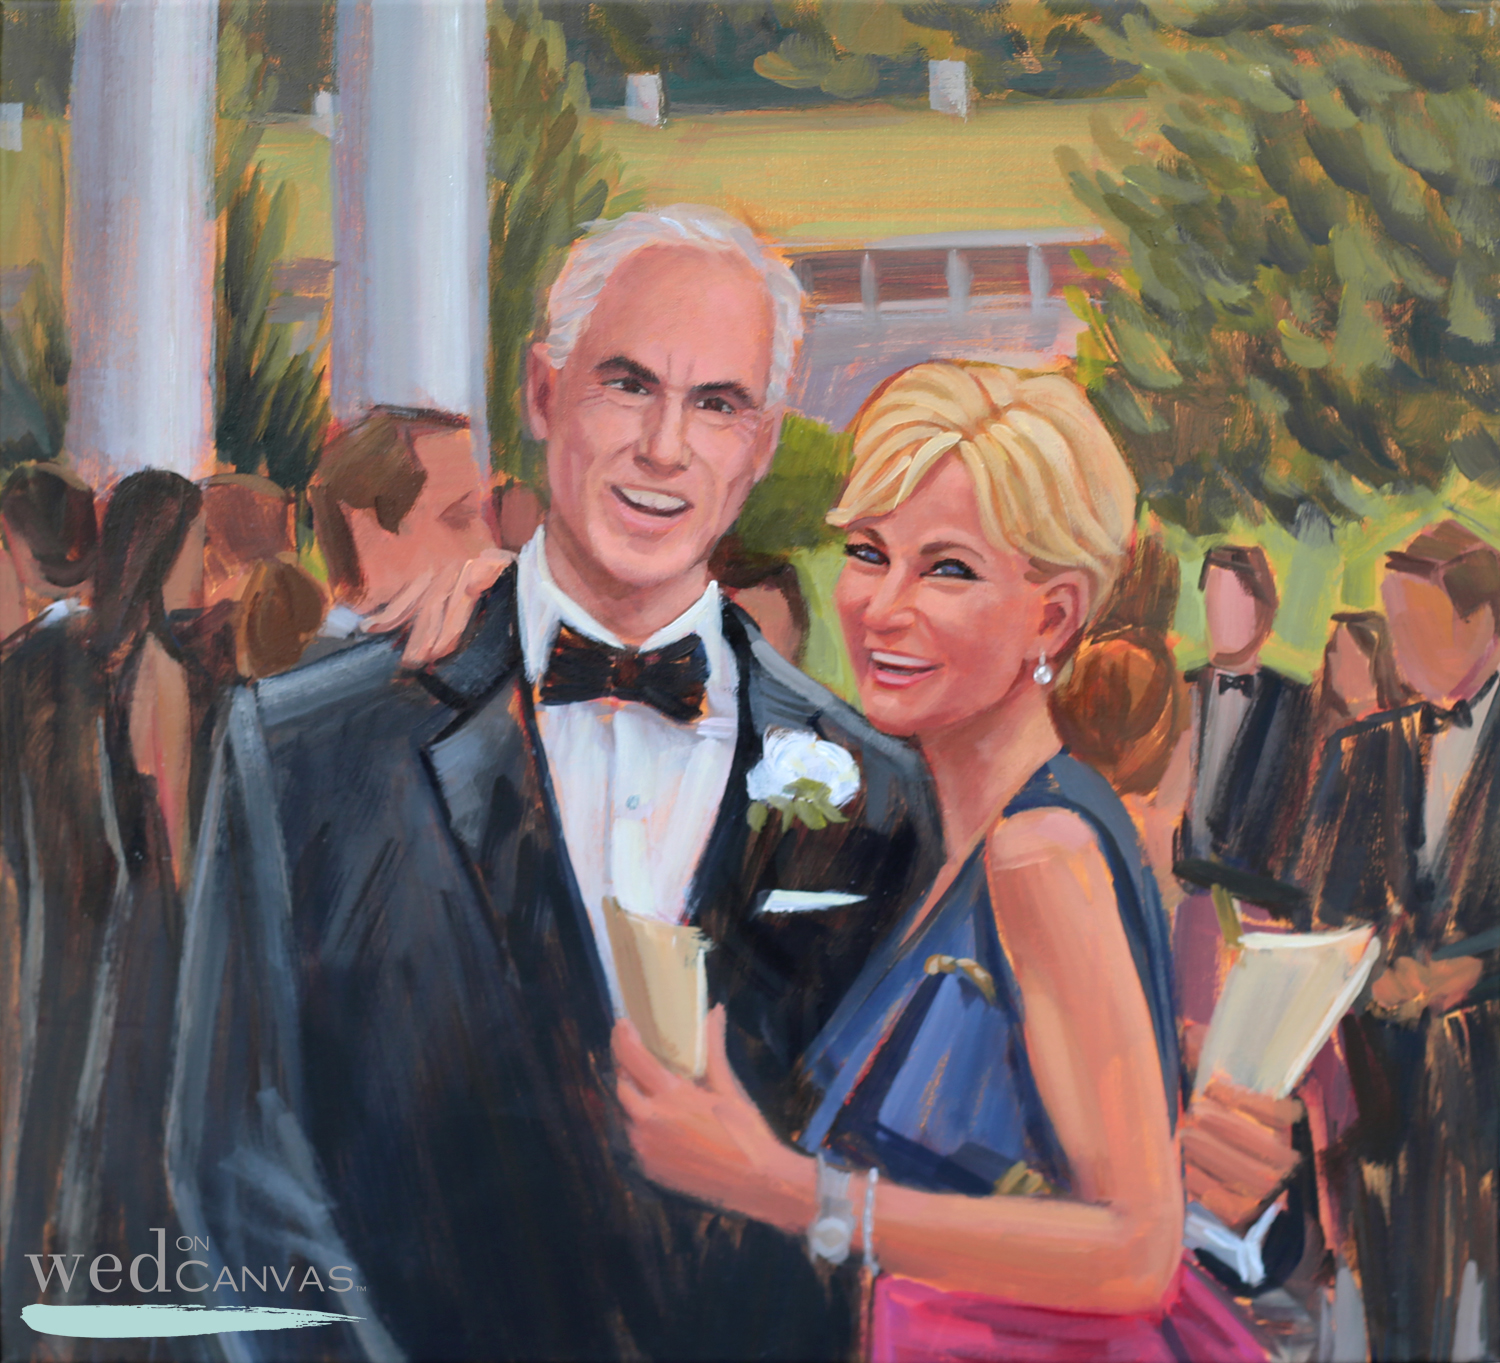 Alexandra commissioned Ben to capture a portrait of her parents that was created merging several photos together after the wedding day.  Her thought was that this would be the perfect Thank You for hosting the wedding of her dreams!  